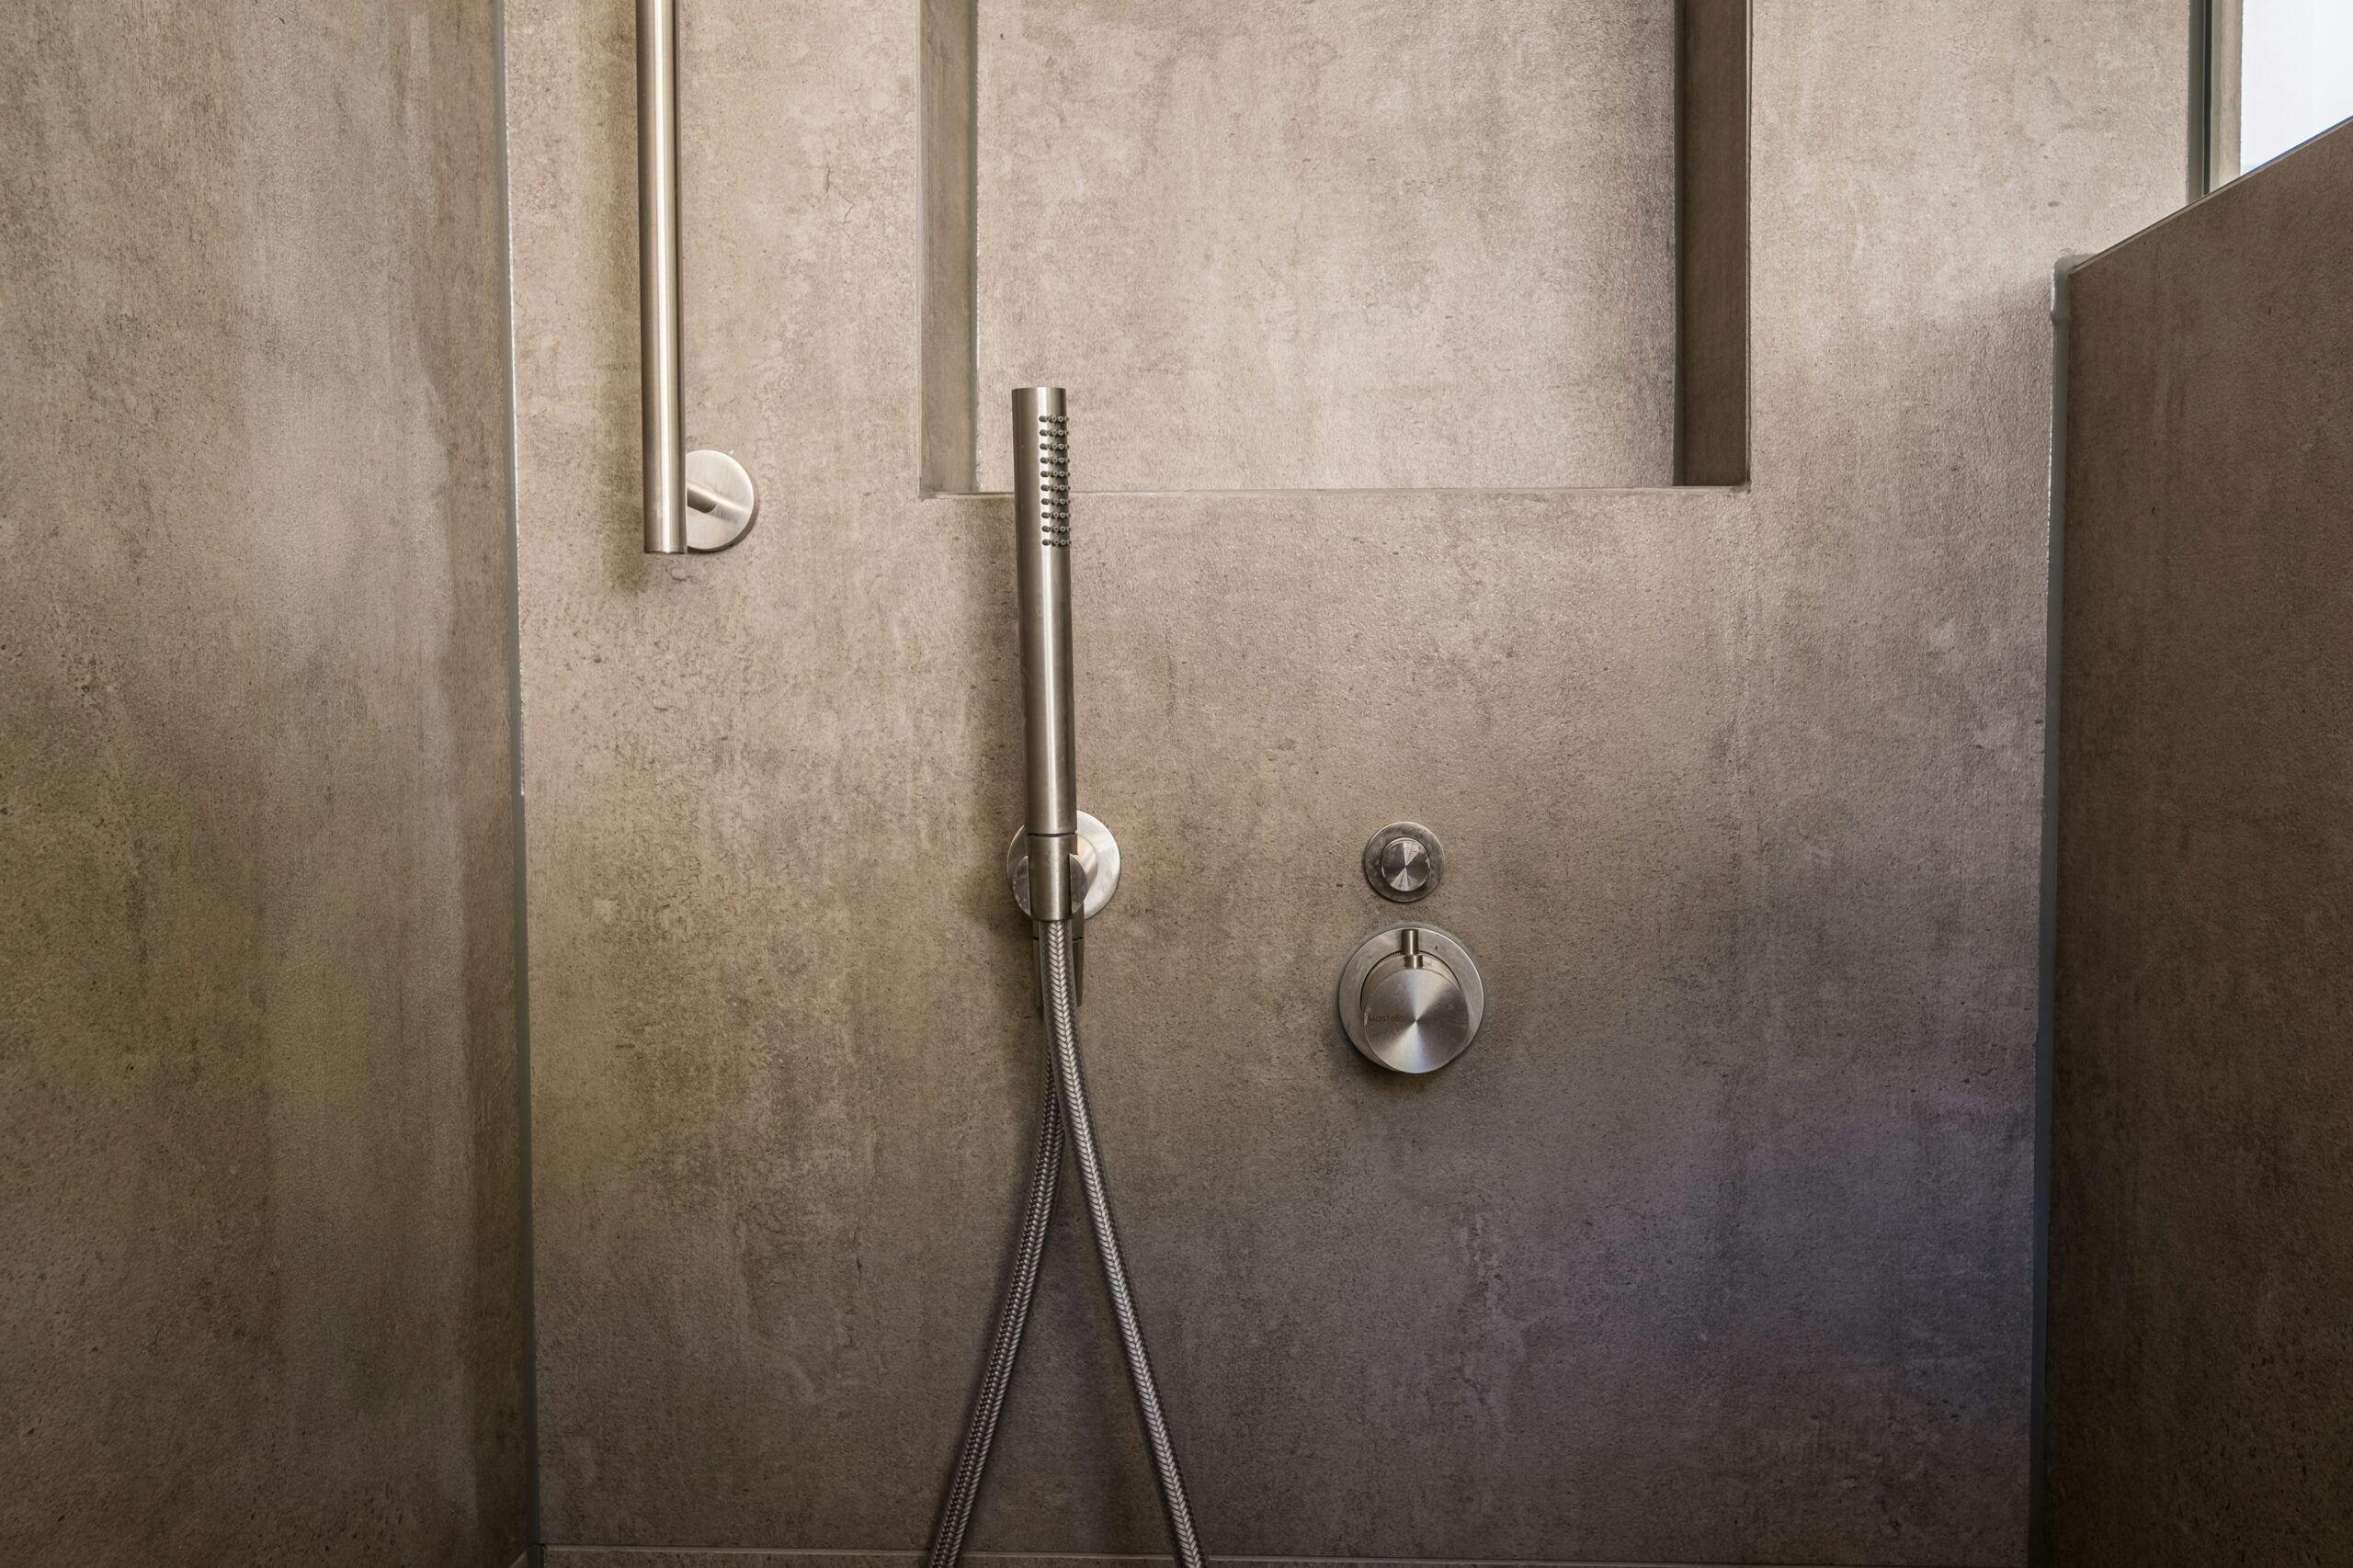 upgrade your shower experience with our premium shower heads. discover a range of styles and features to elevate your daily routine.